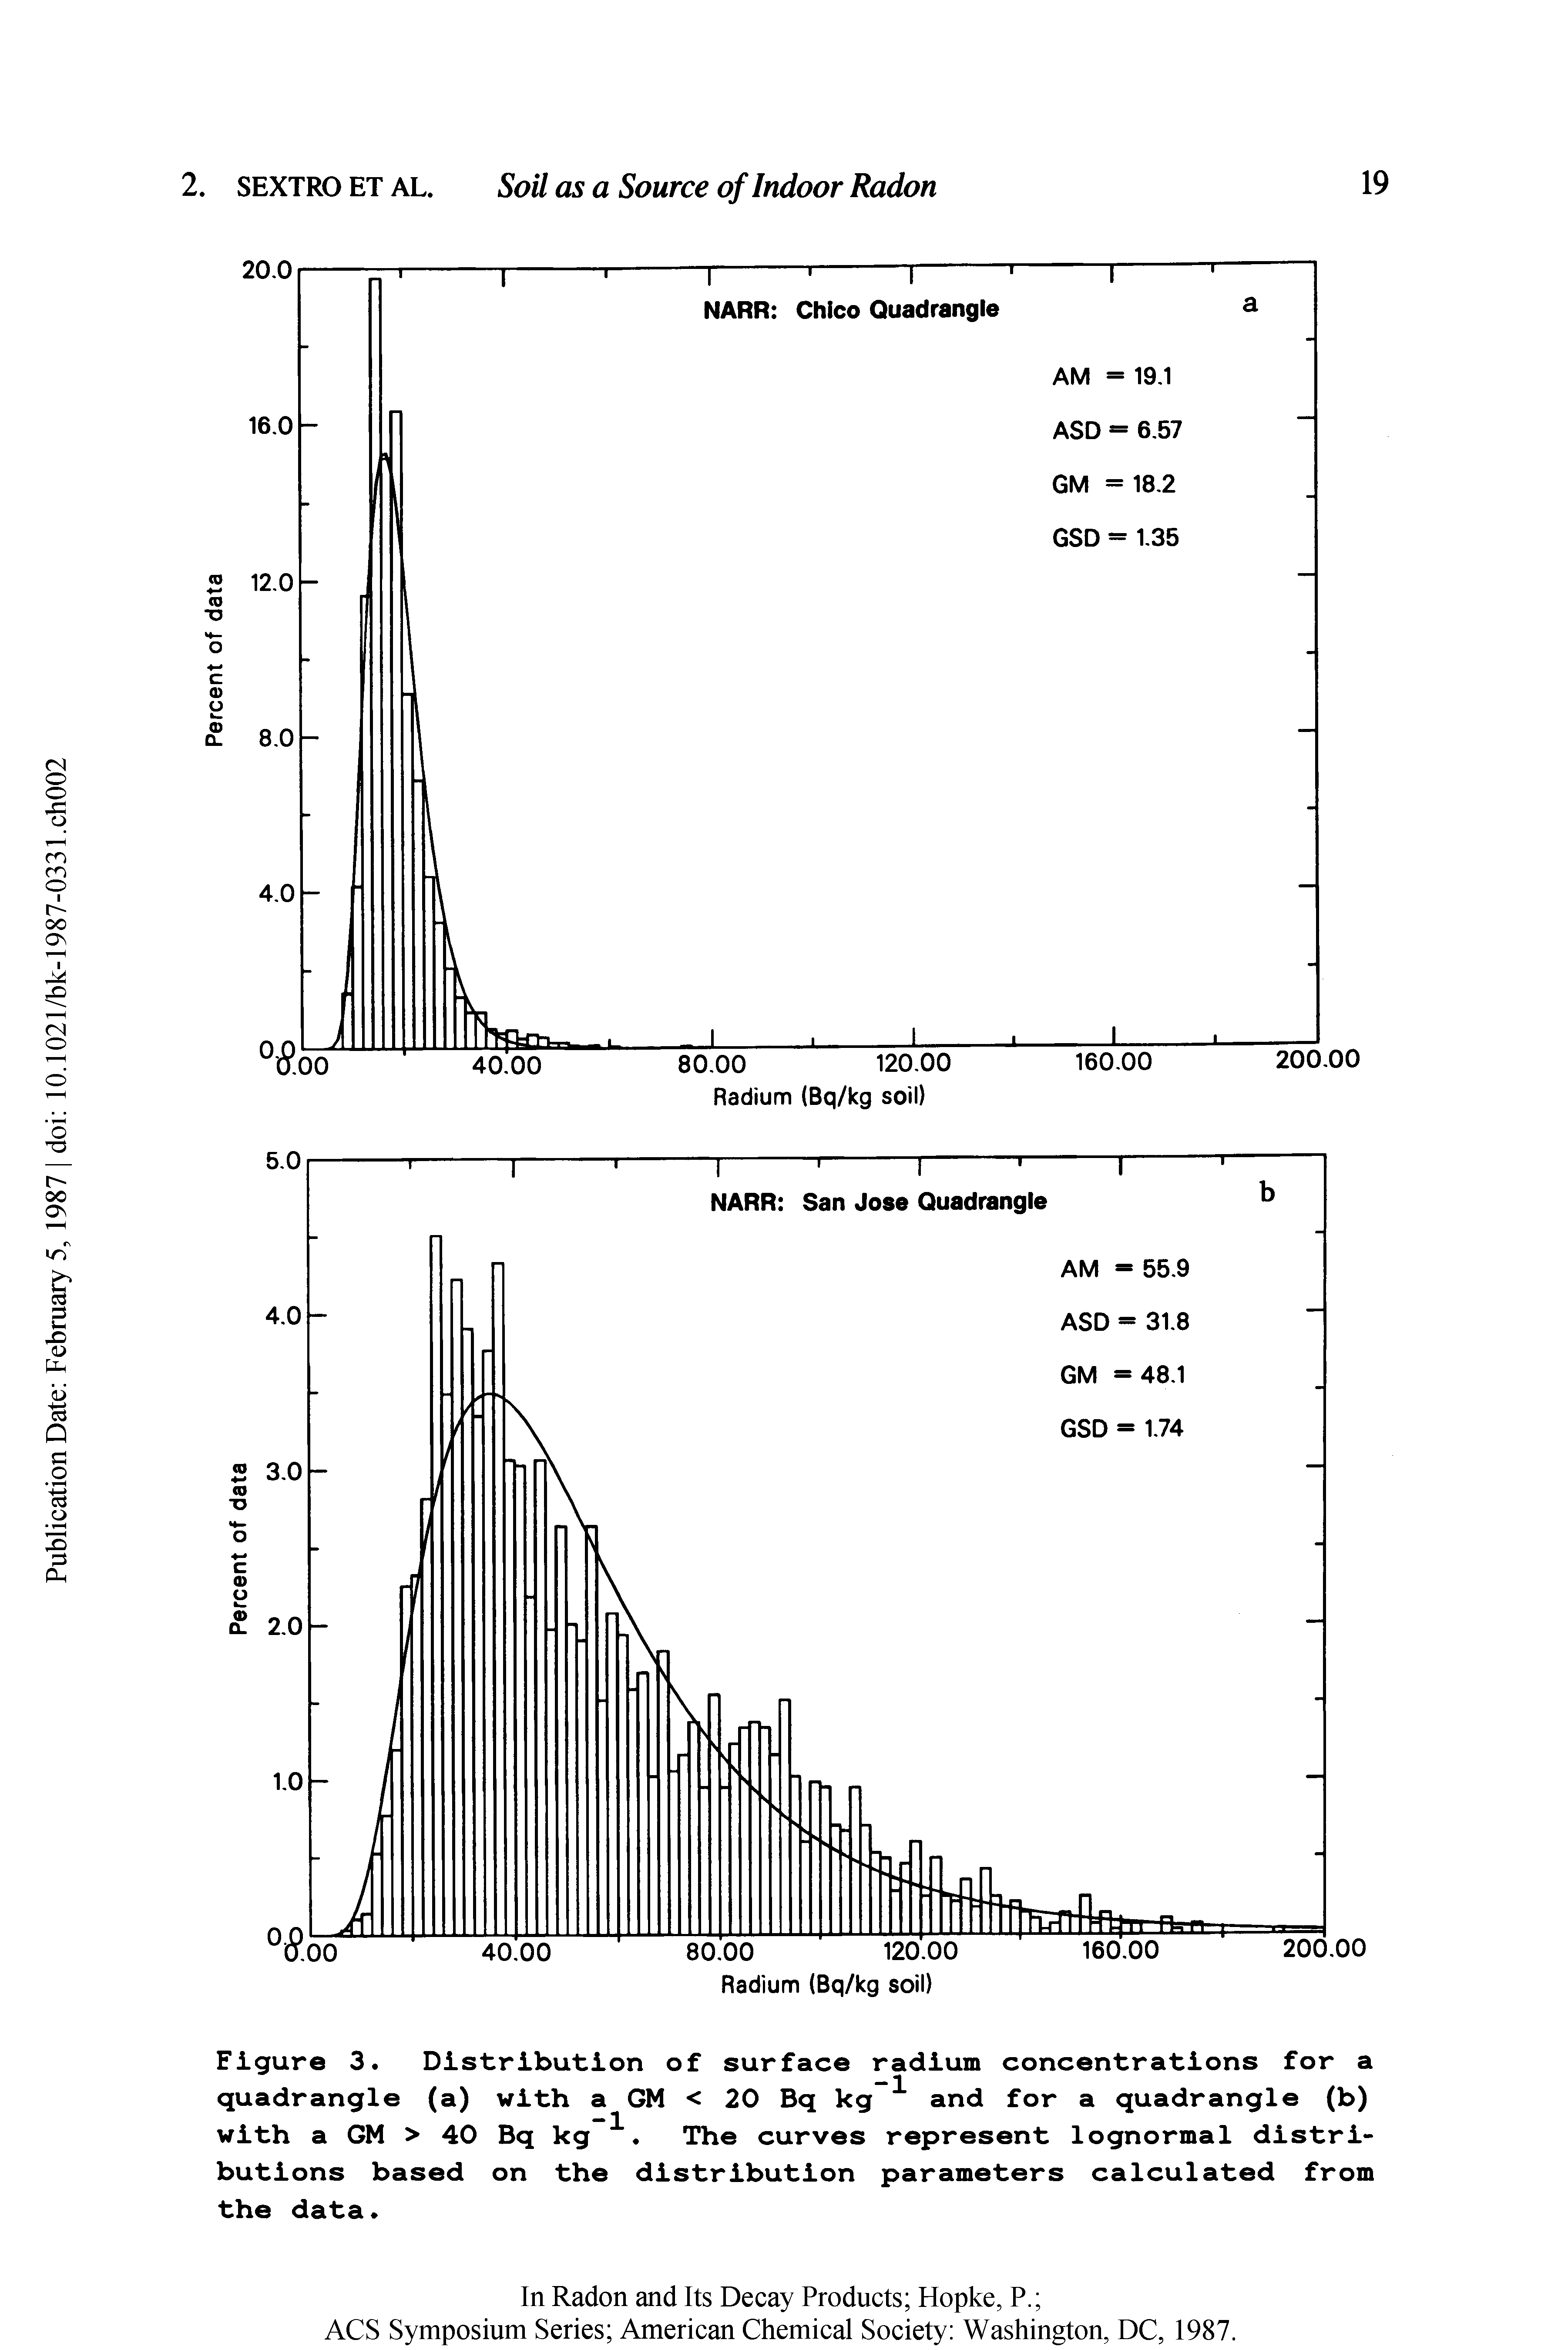 Figure 3. Distribution of surface radium concentrations for a quadrangle (a) with a GM < 20 Bq kg and for a quadrangle (b) with a GM > 40 Bq kg. The curves represent lognormal distributions based on the distribution parameters calculated from the data.